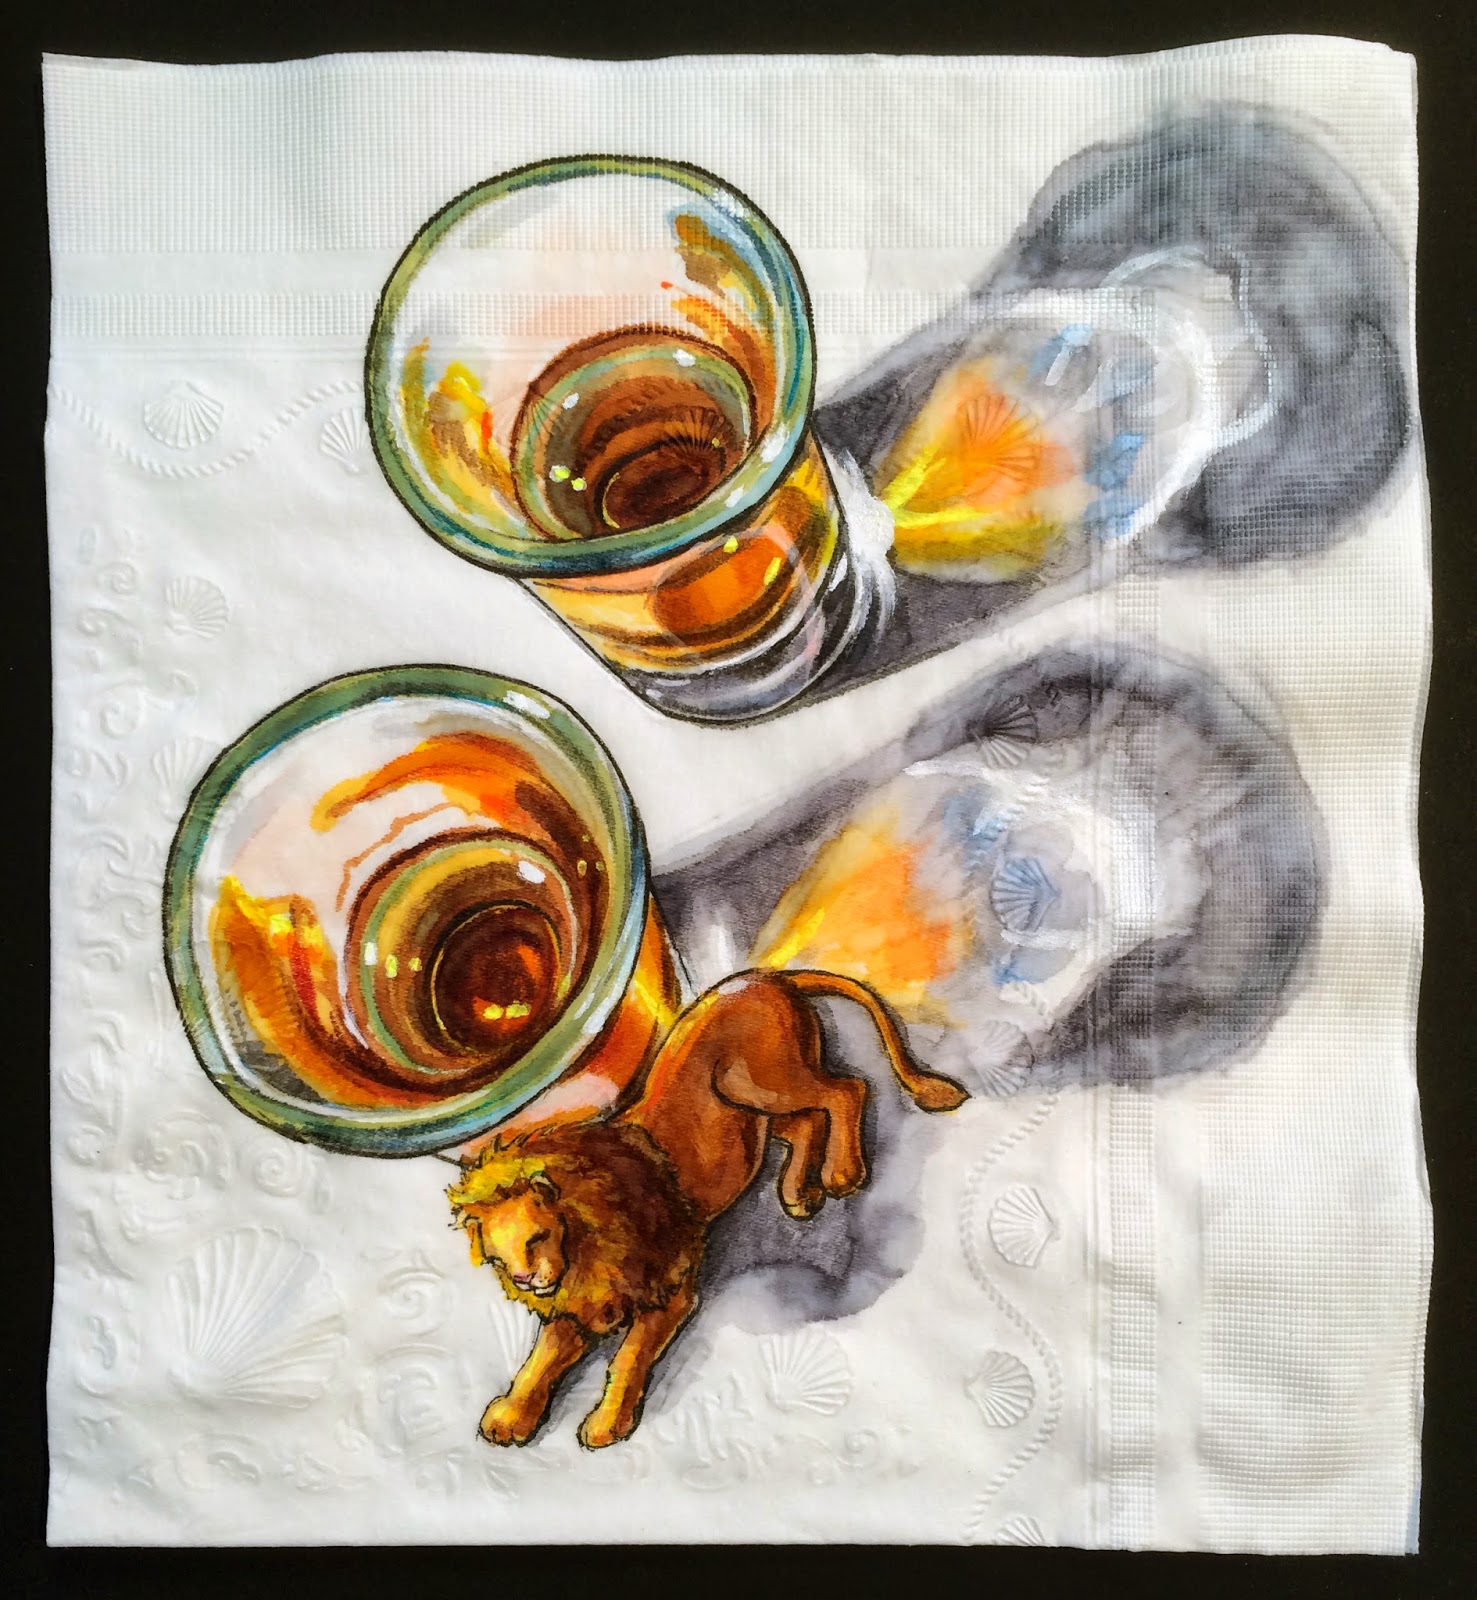 http://ninaslevy.blogspot.com/2014/03/cocktail-napkin-with-lion-for-scale.html